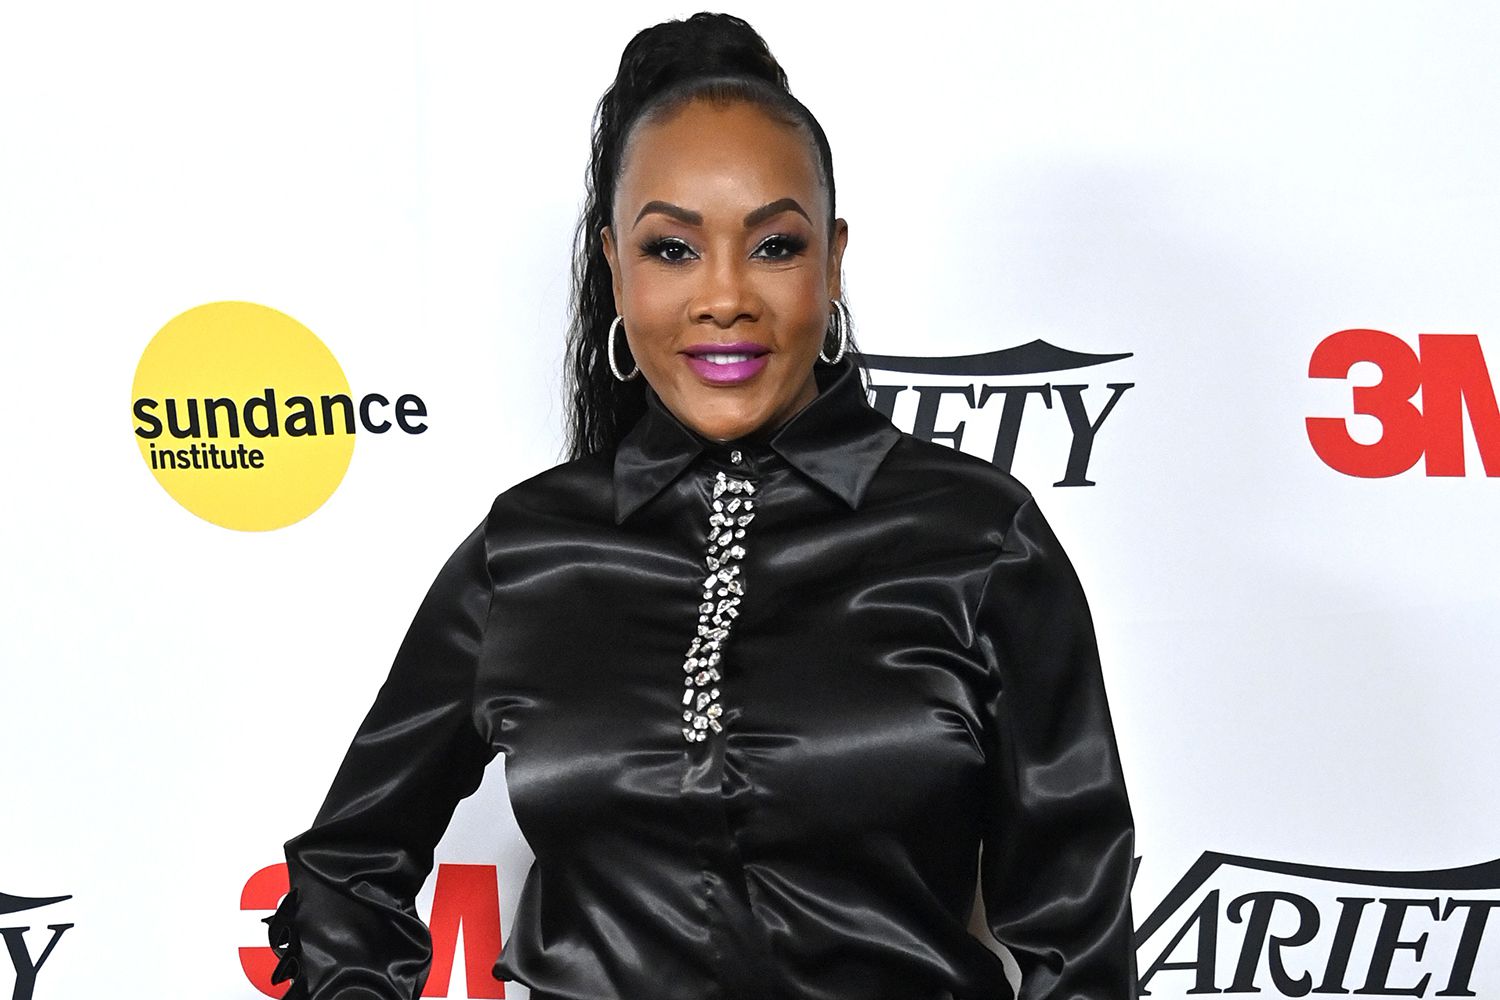 Vivica Fox wearing a black outfit